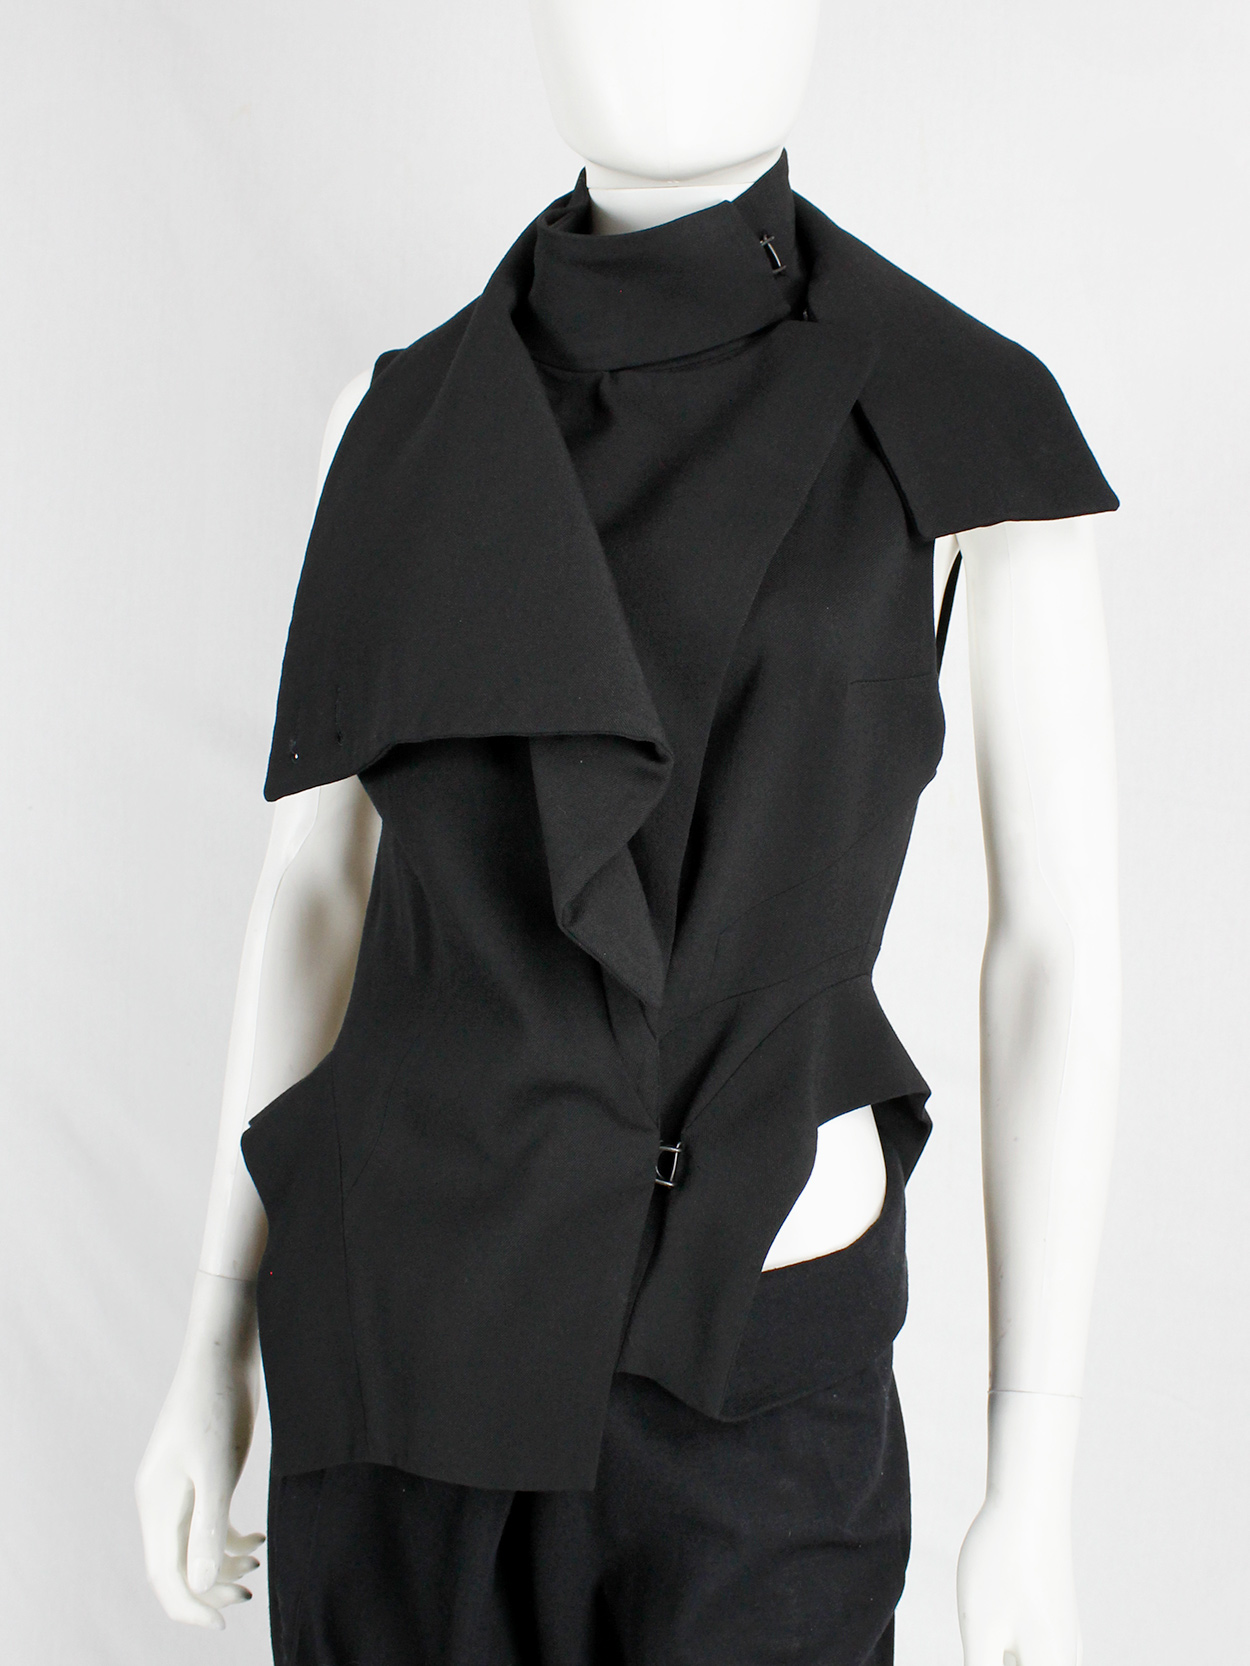 Ann Demeulemeester black draped vest with standing collar and zipper ...